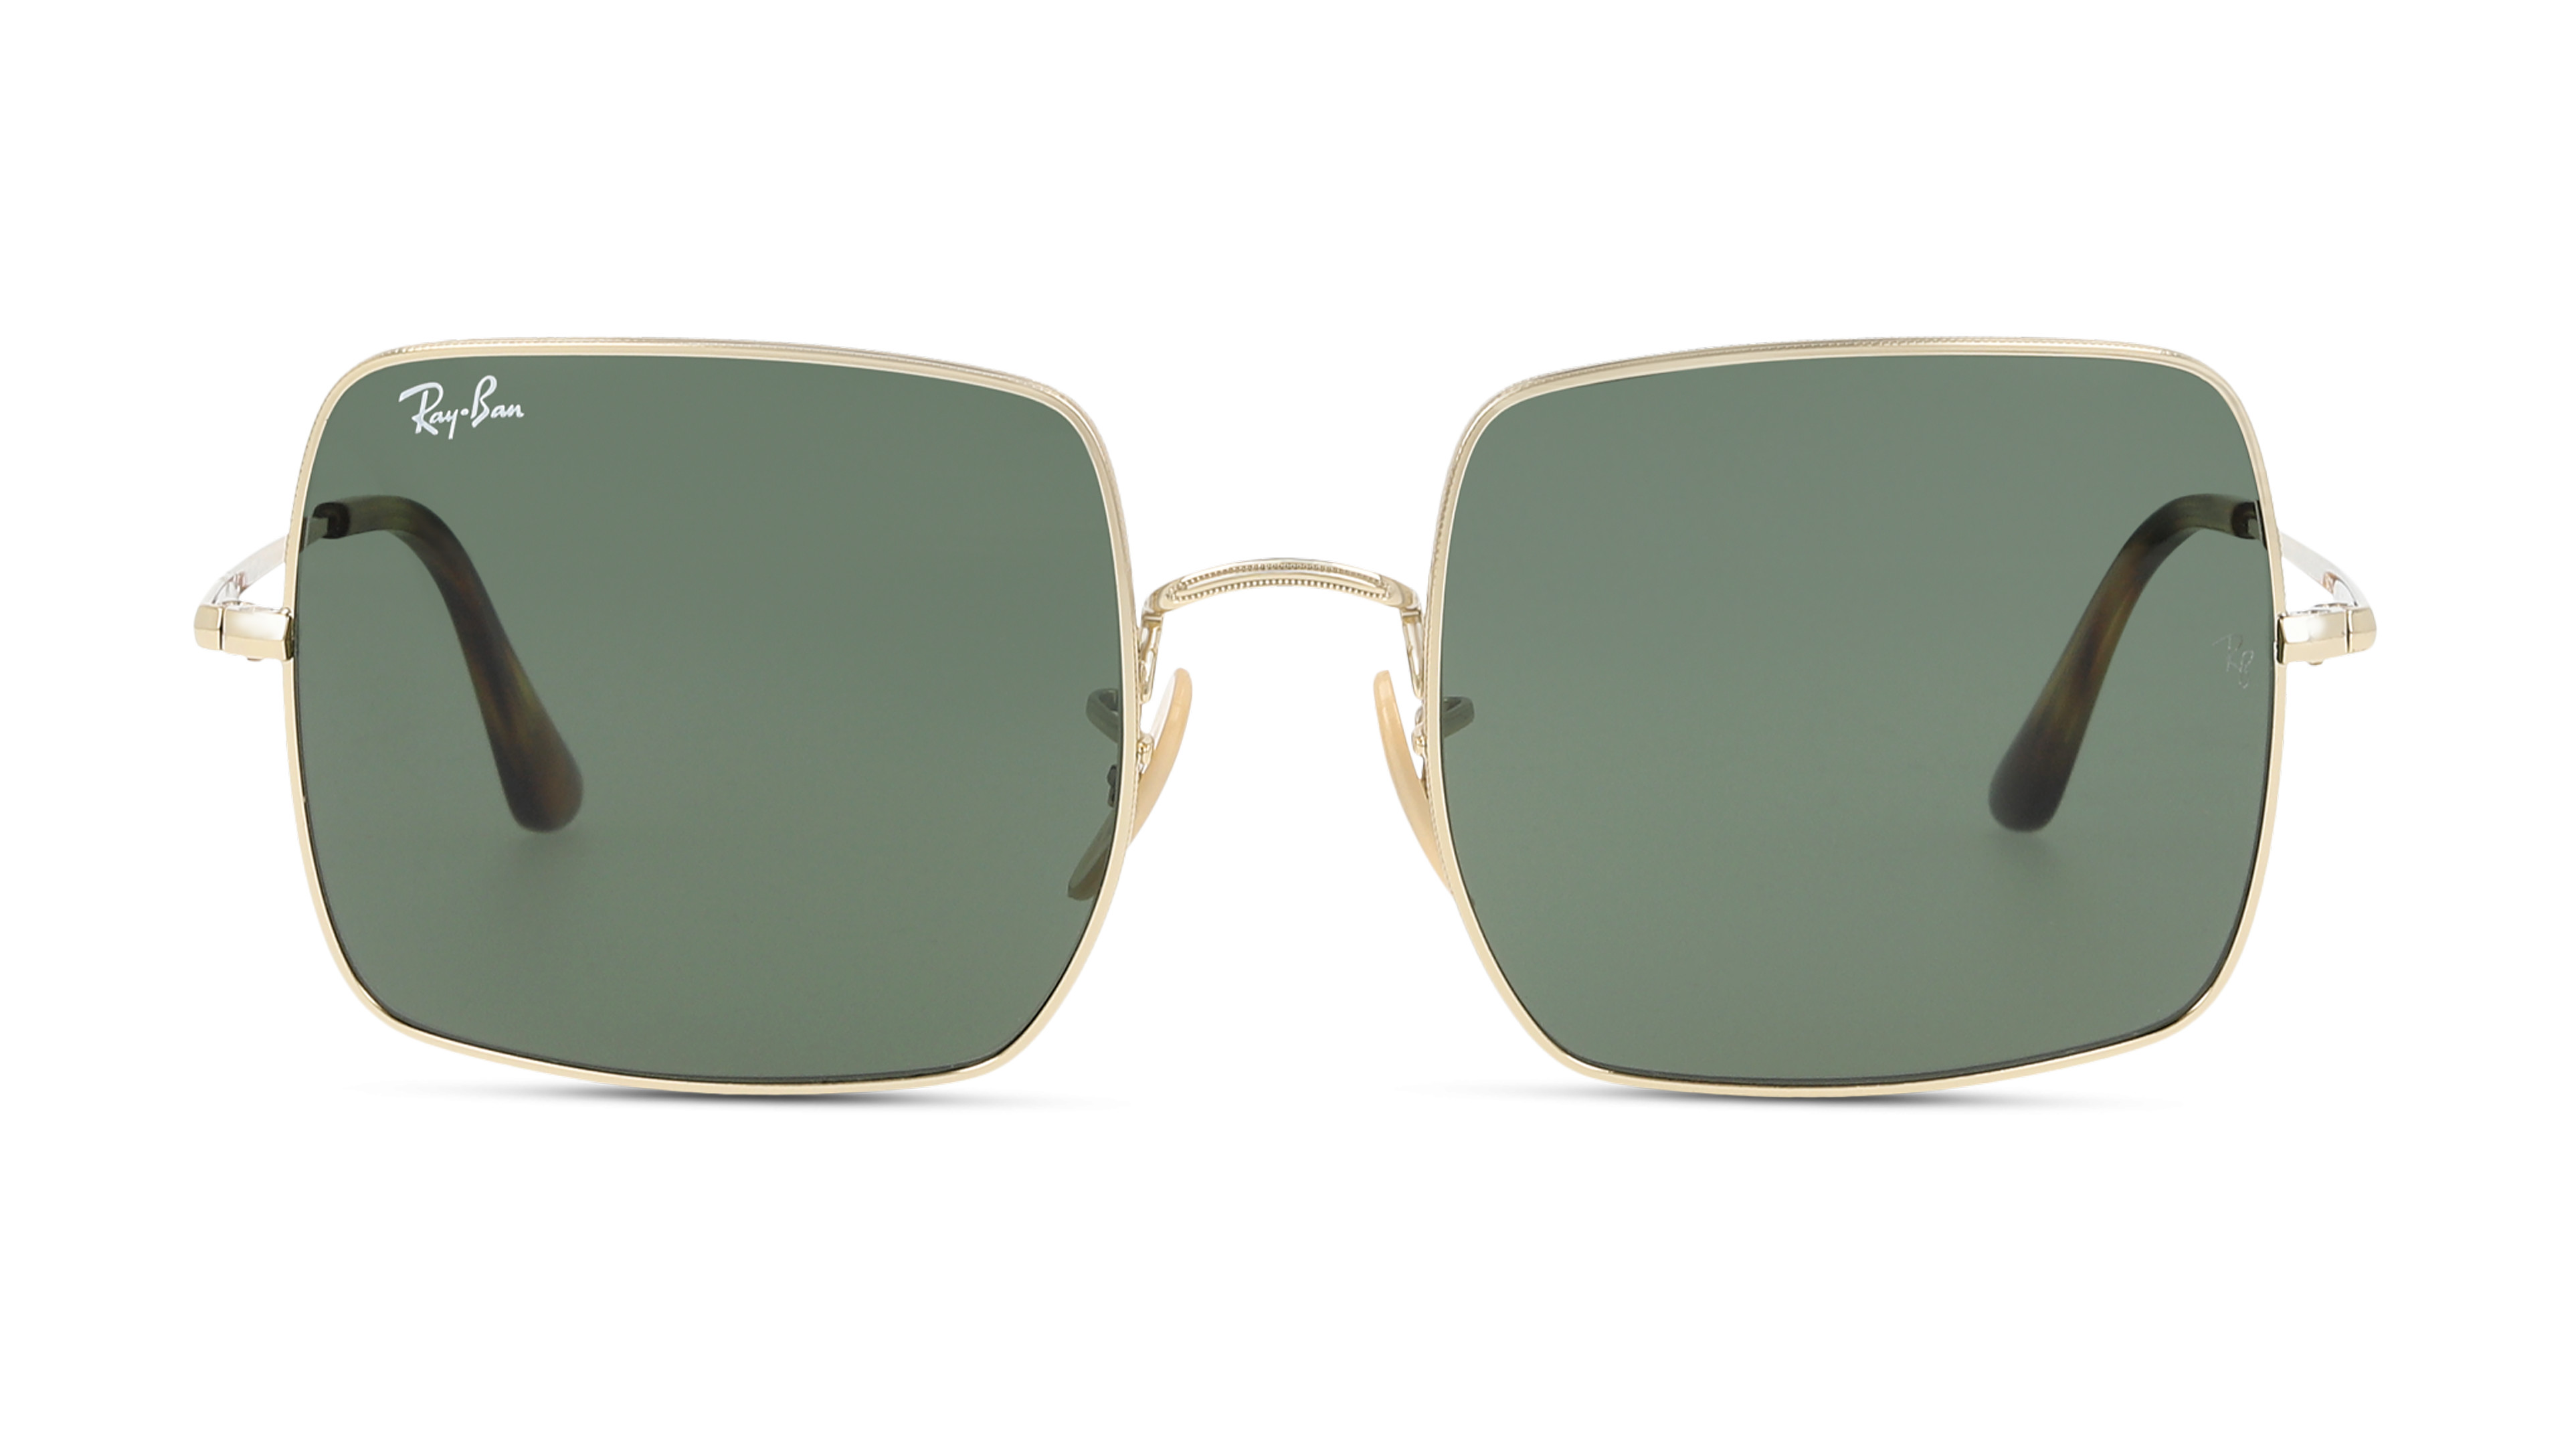 [products.image.front] Ray-Ban SQUARE 0RB1971 914731 Sonnenbrille